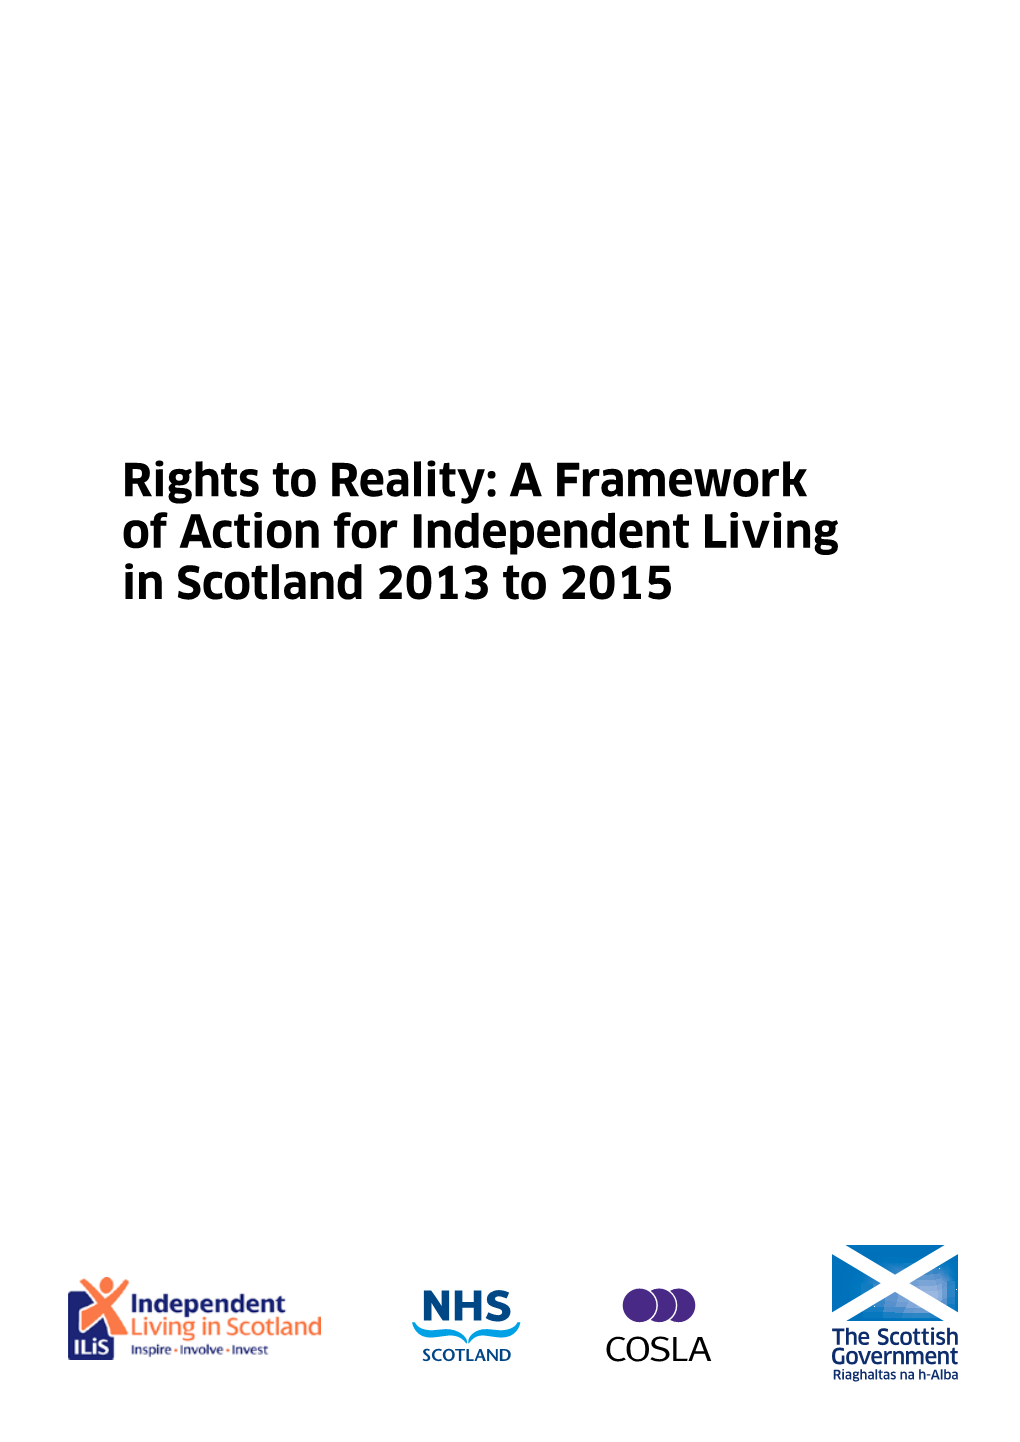 Rights to Reality: a Framework of Action for Independent Living in Scotland 2013 to 2015